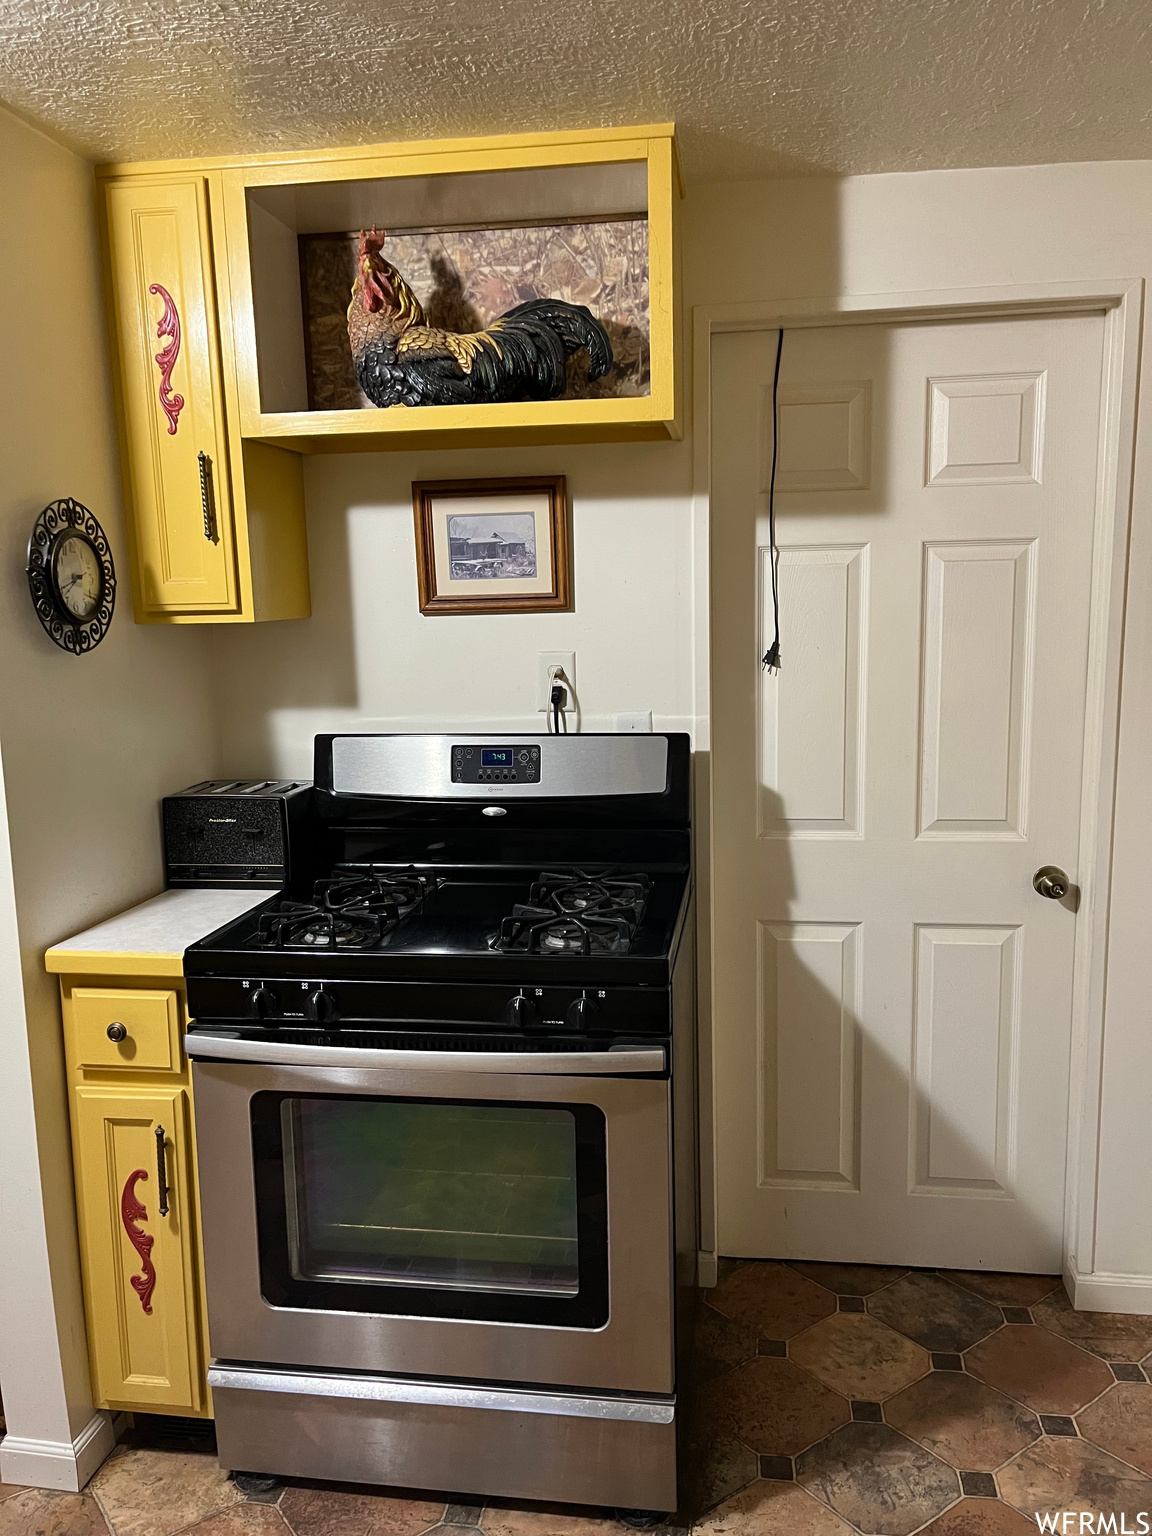 Kitchen with dark tile floors, stainless steel gas range and oven.